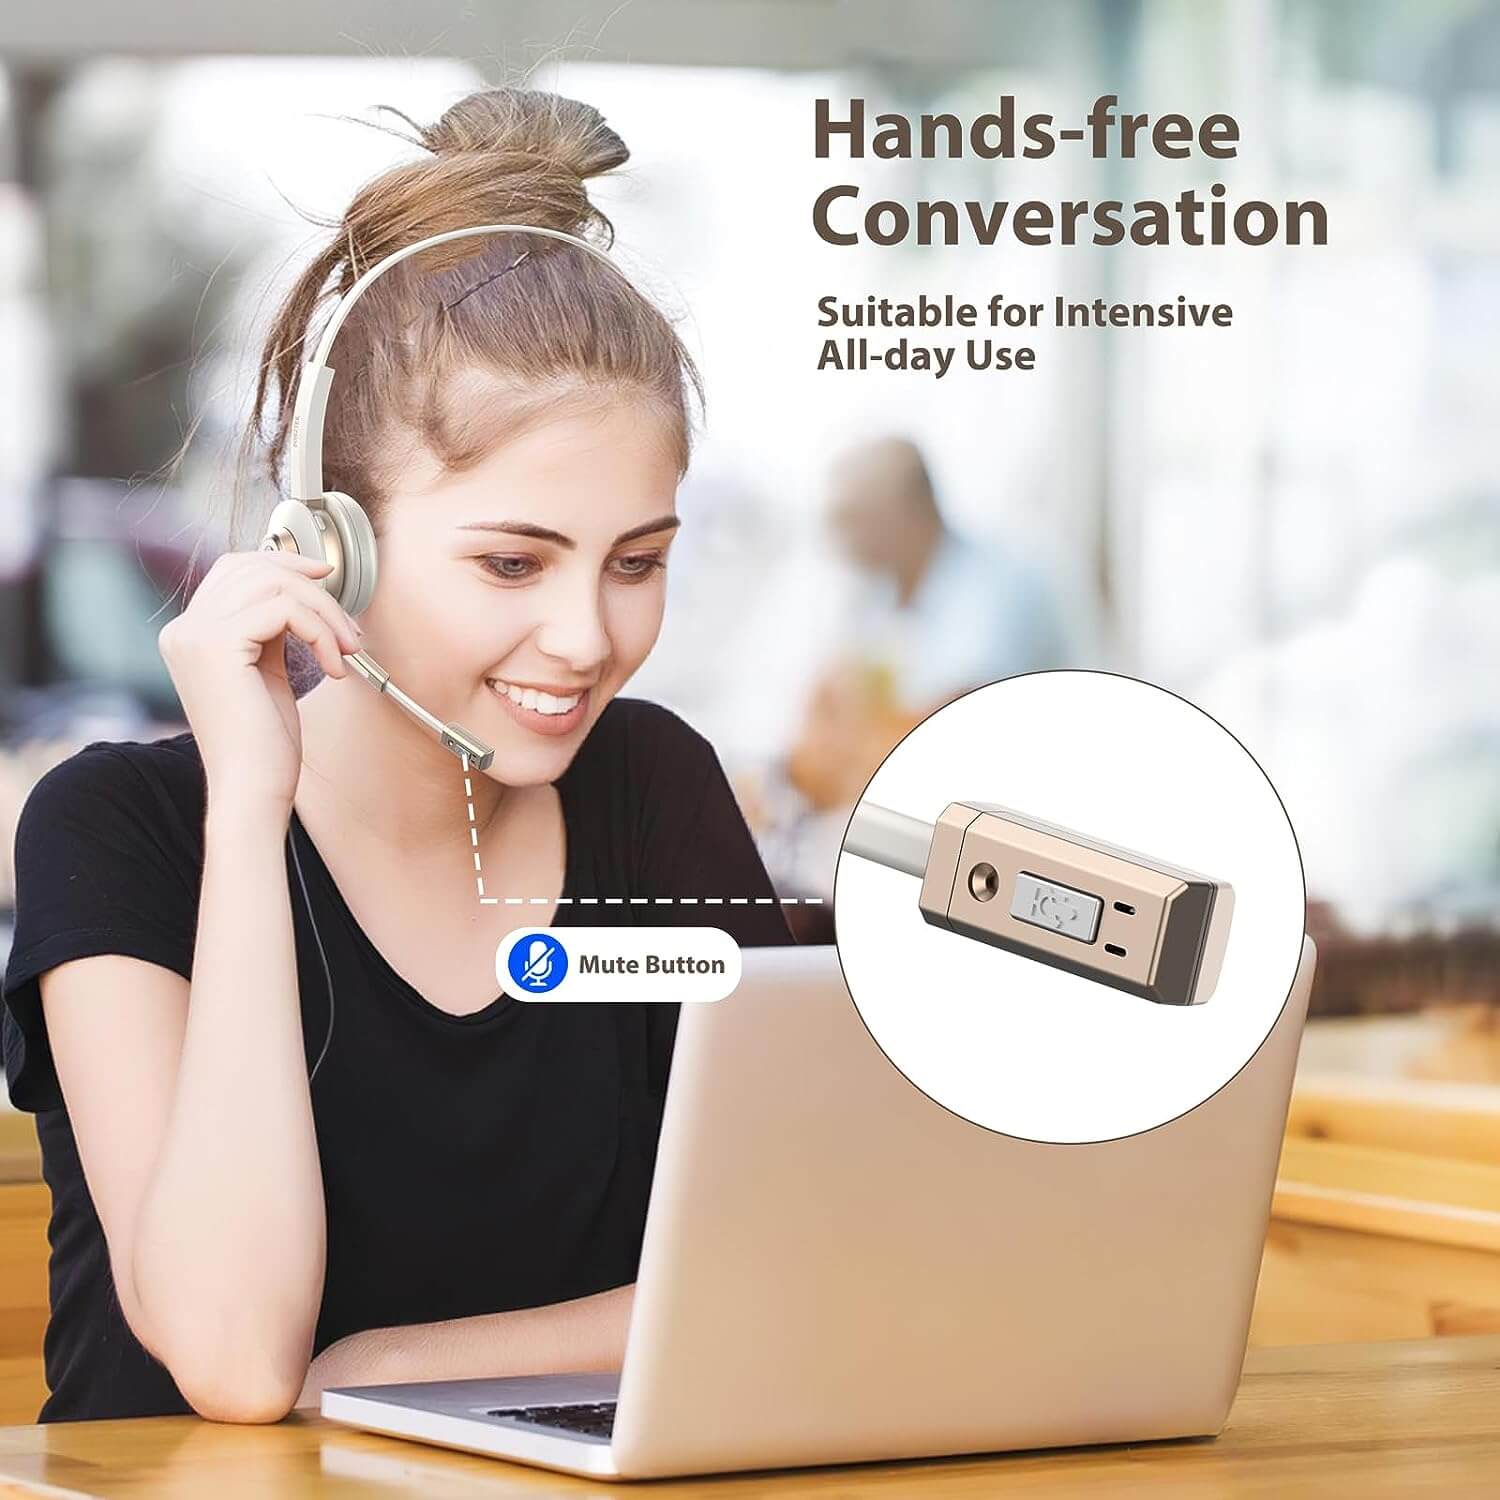 Hands-free conversation,Suitable for intensive ALL-day Use.